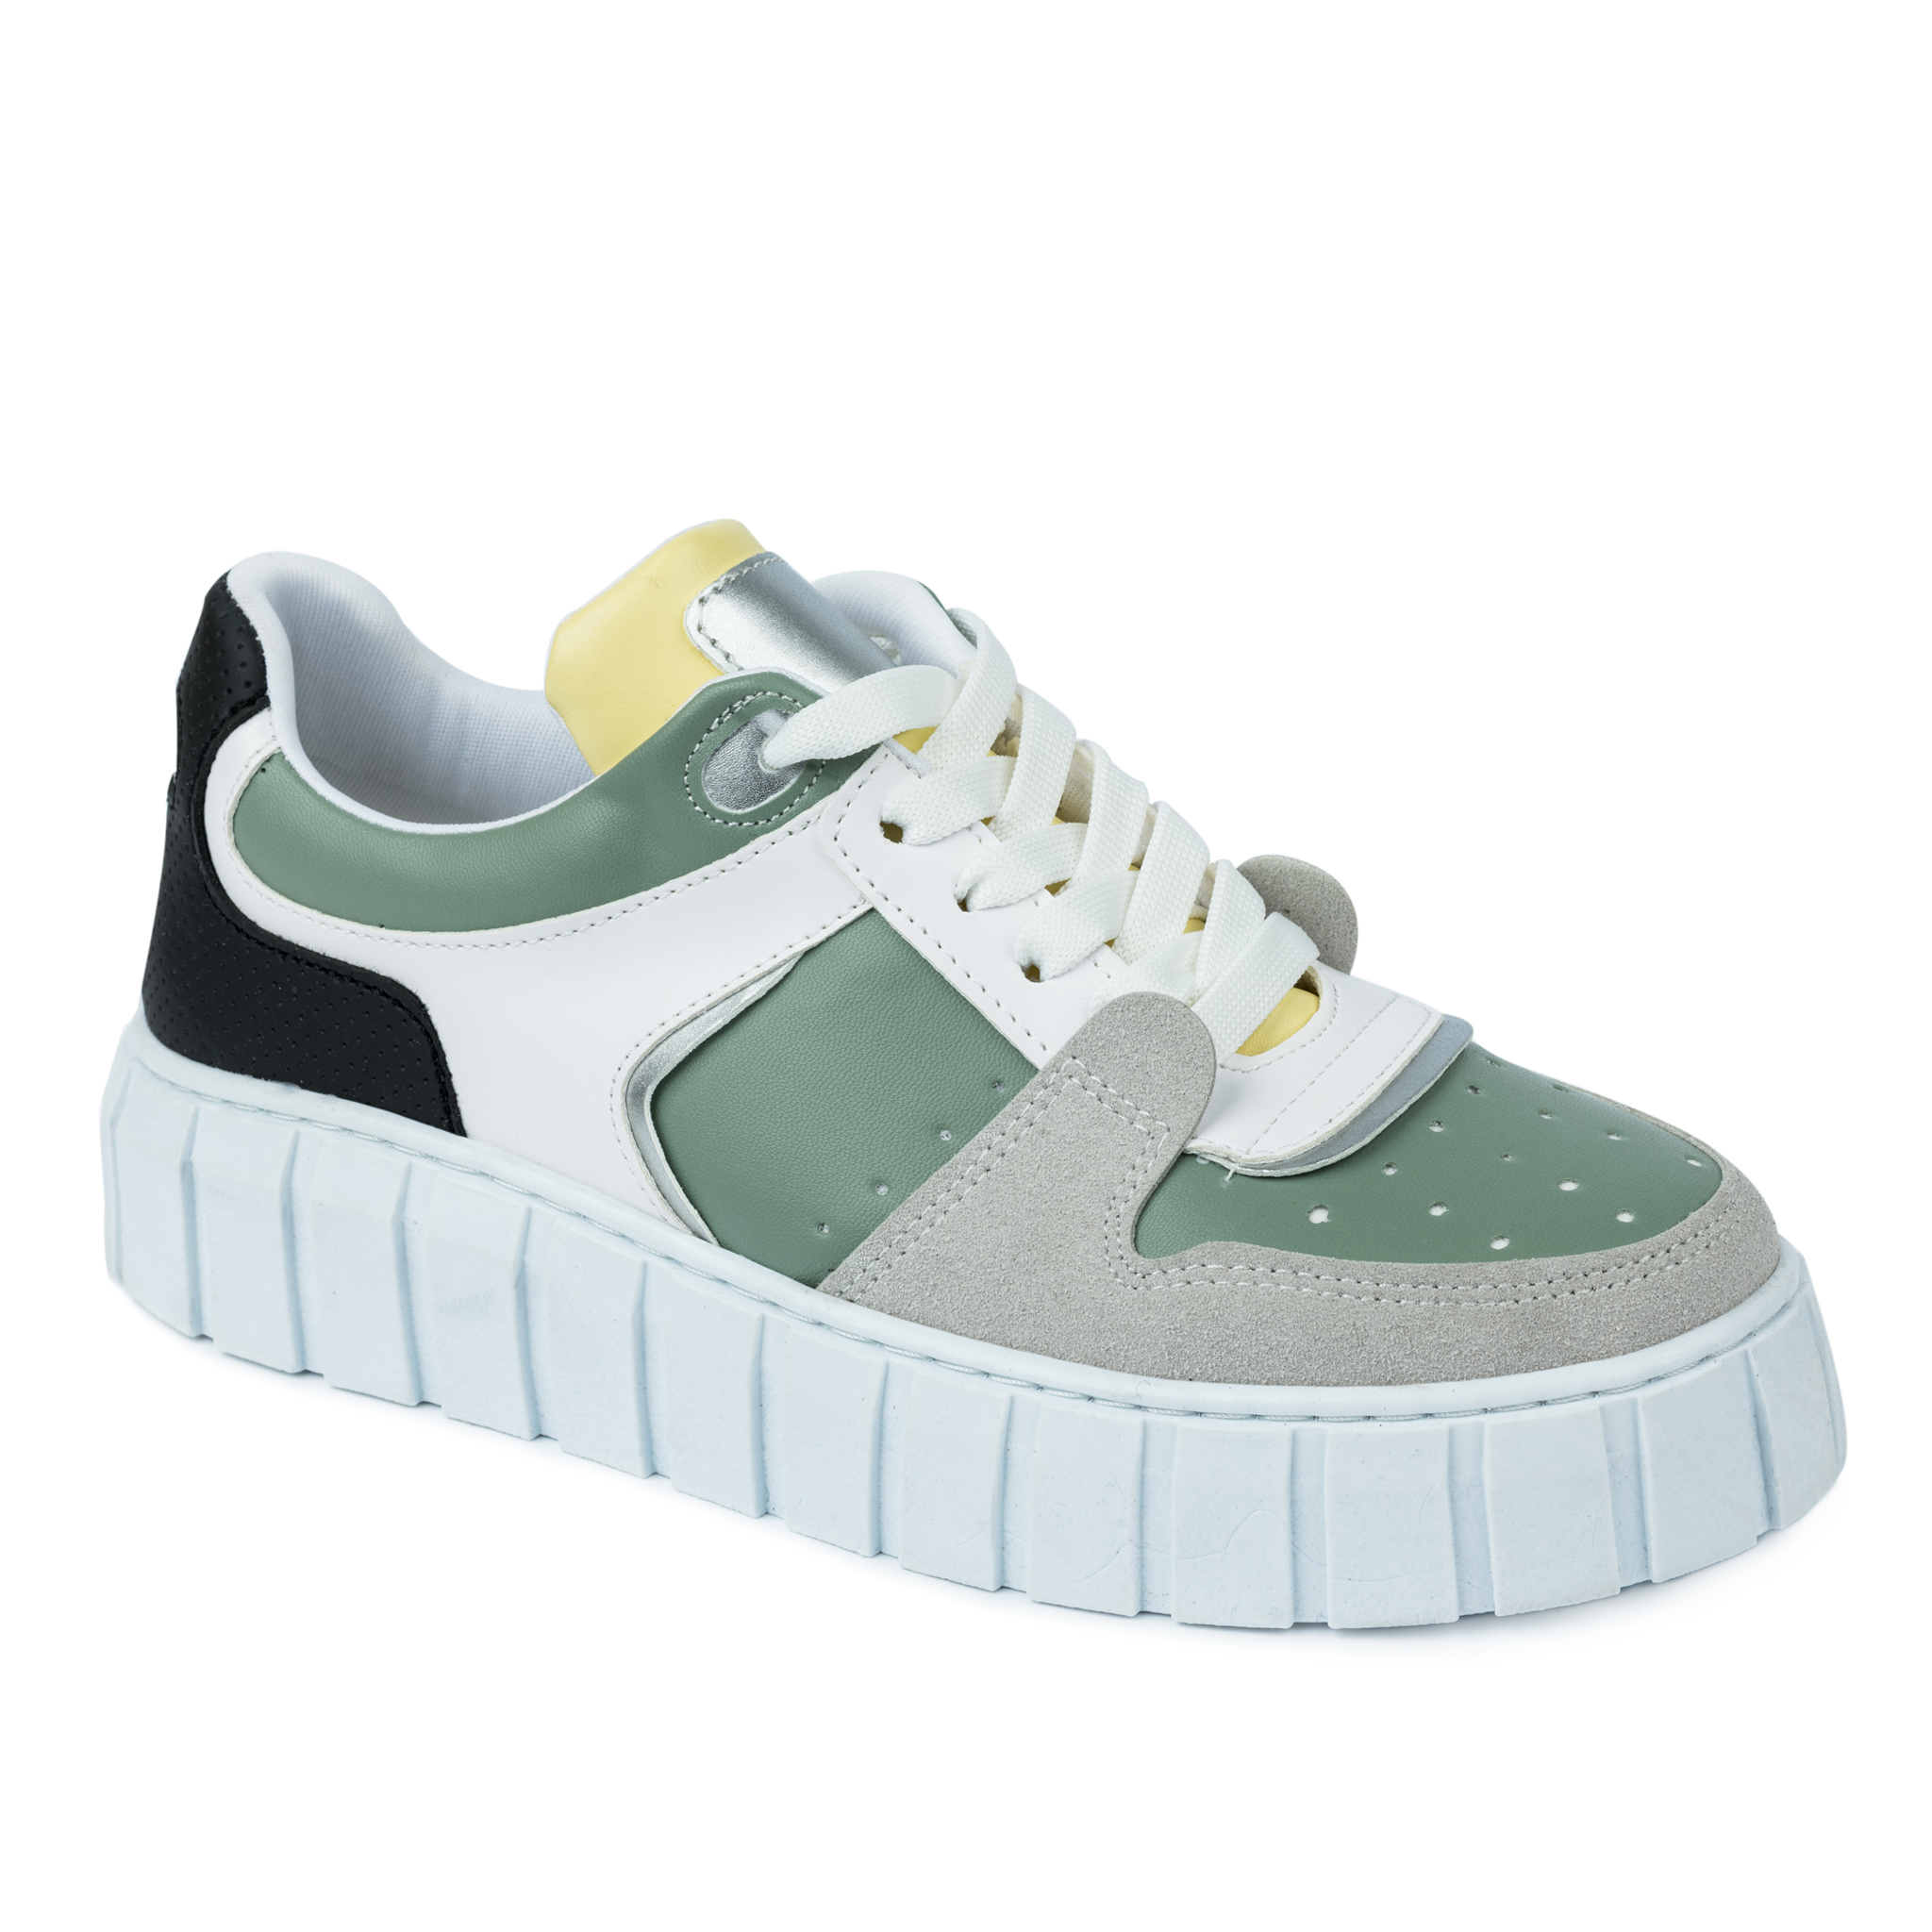 SNEAKERS WITH HIGH SOLE - GREEN